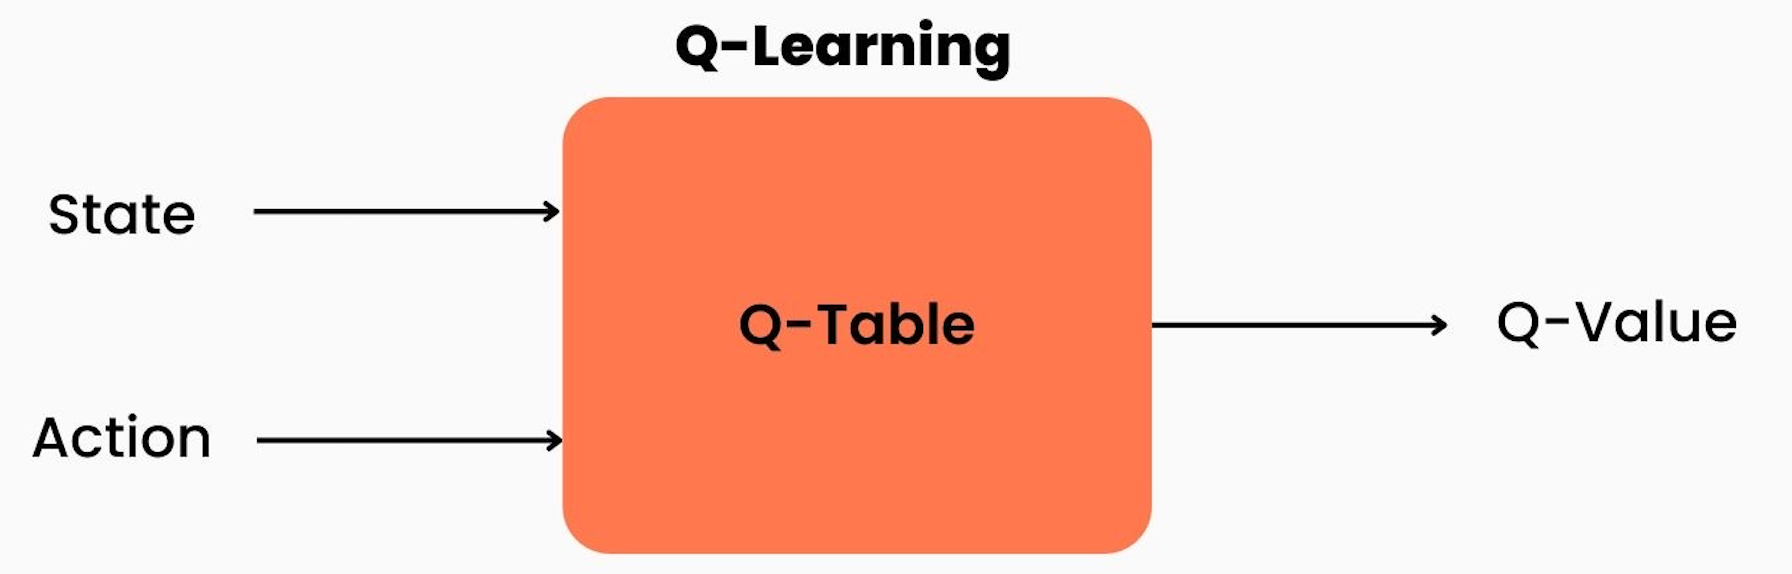 Q-Learning